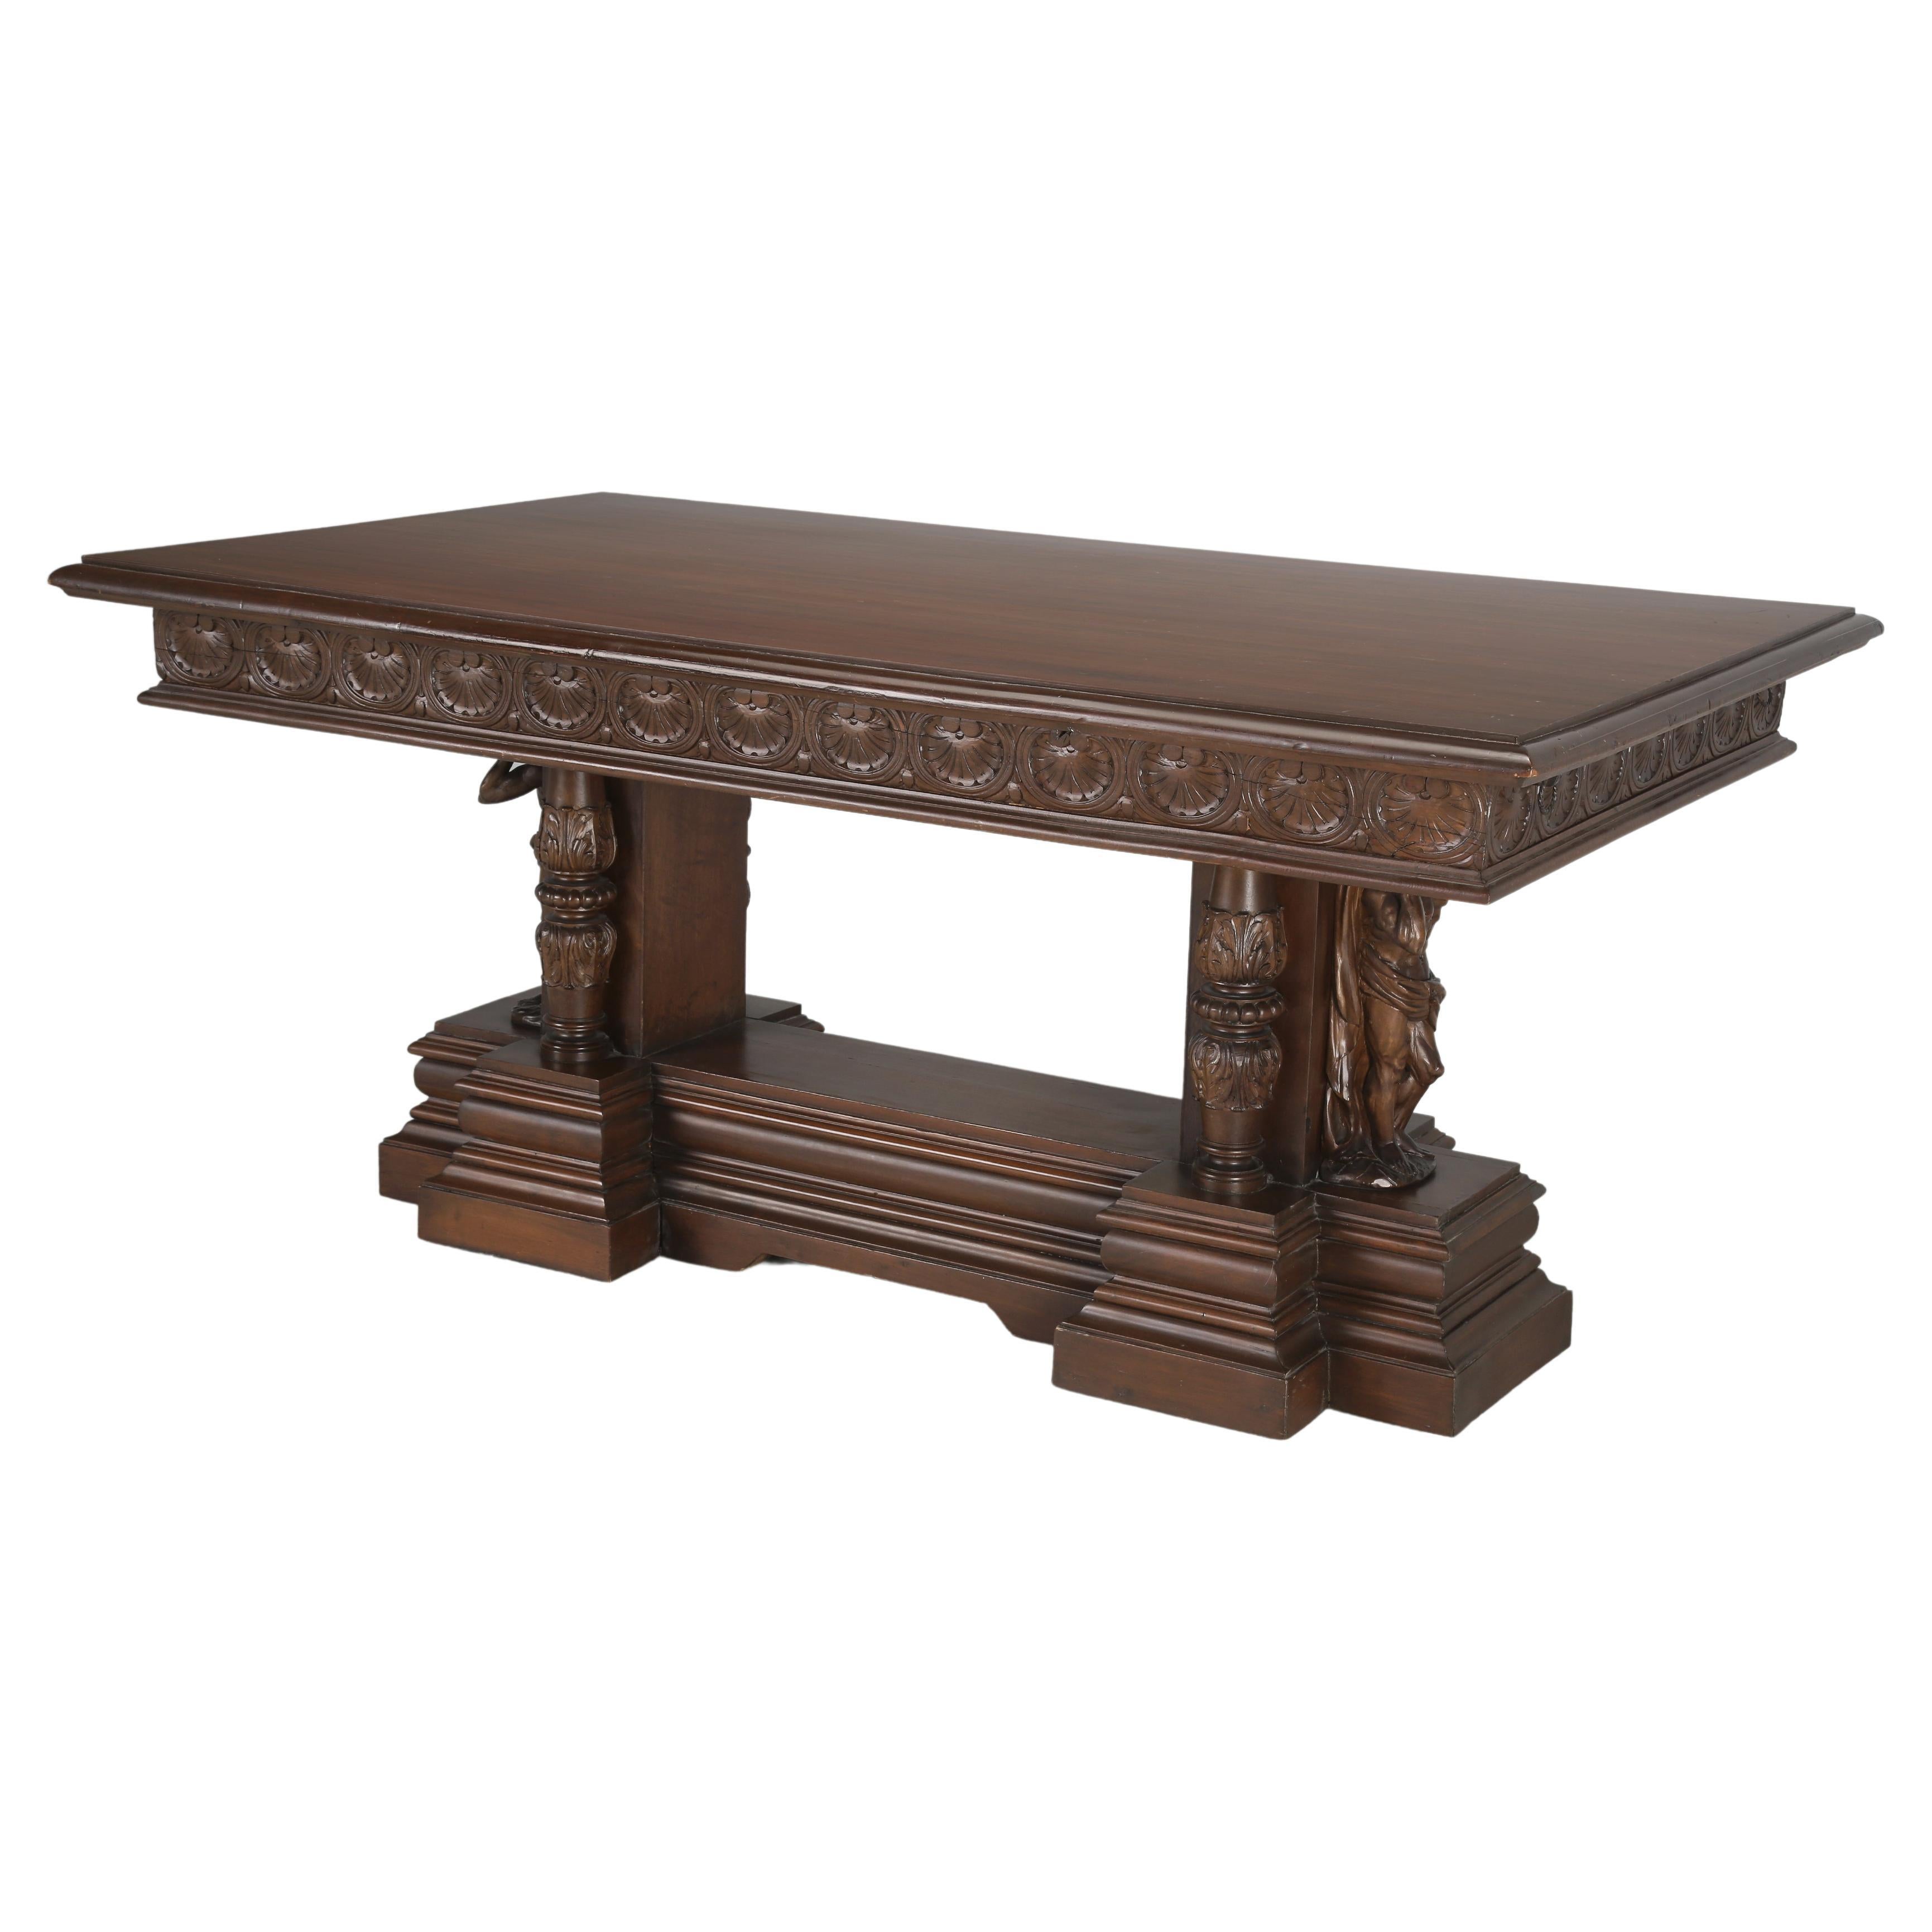 Antique English Mahogany Carved Library Table with Lopers for Expanding Surface